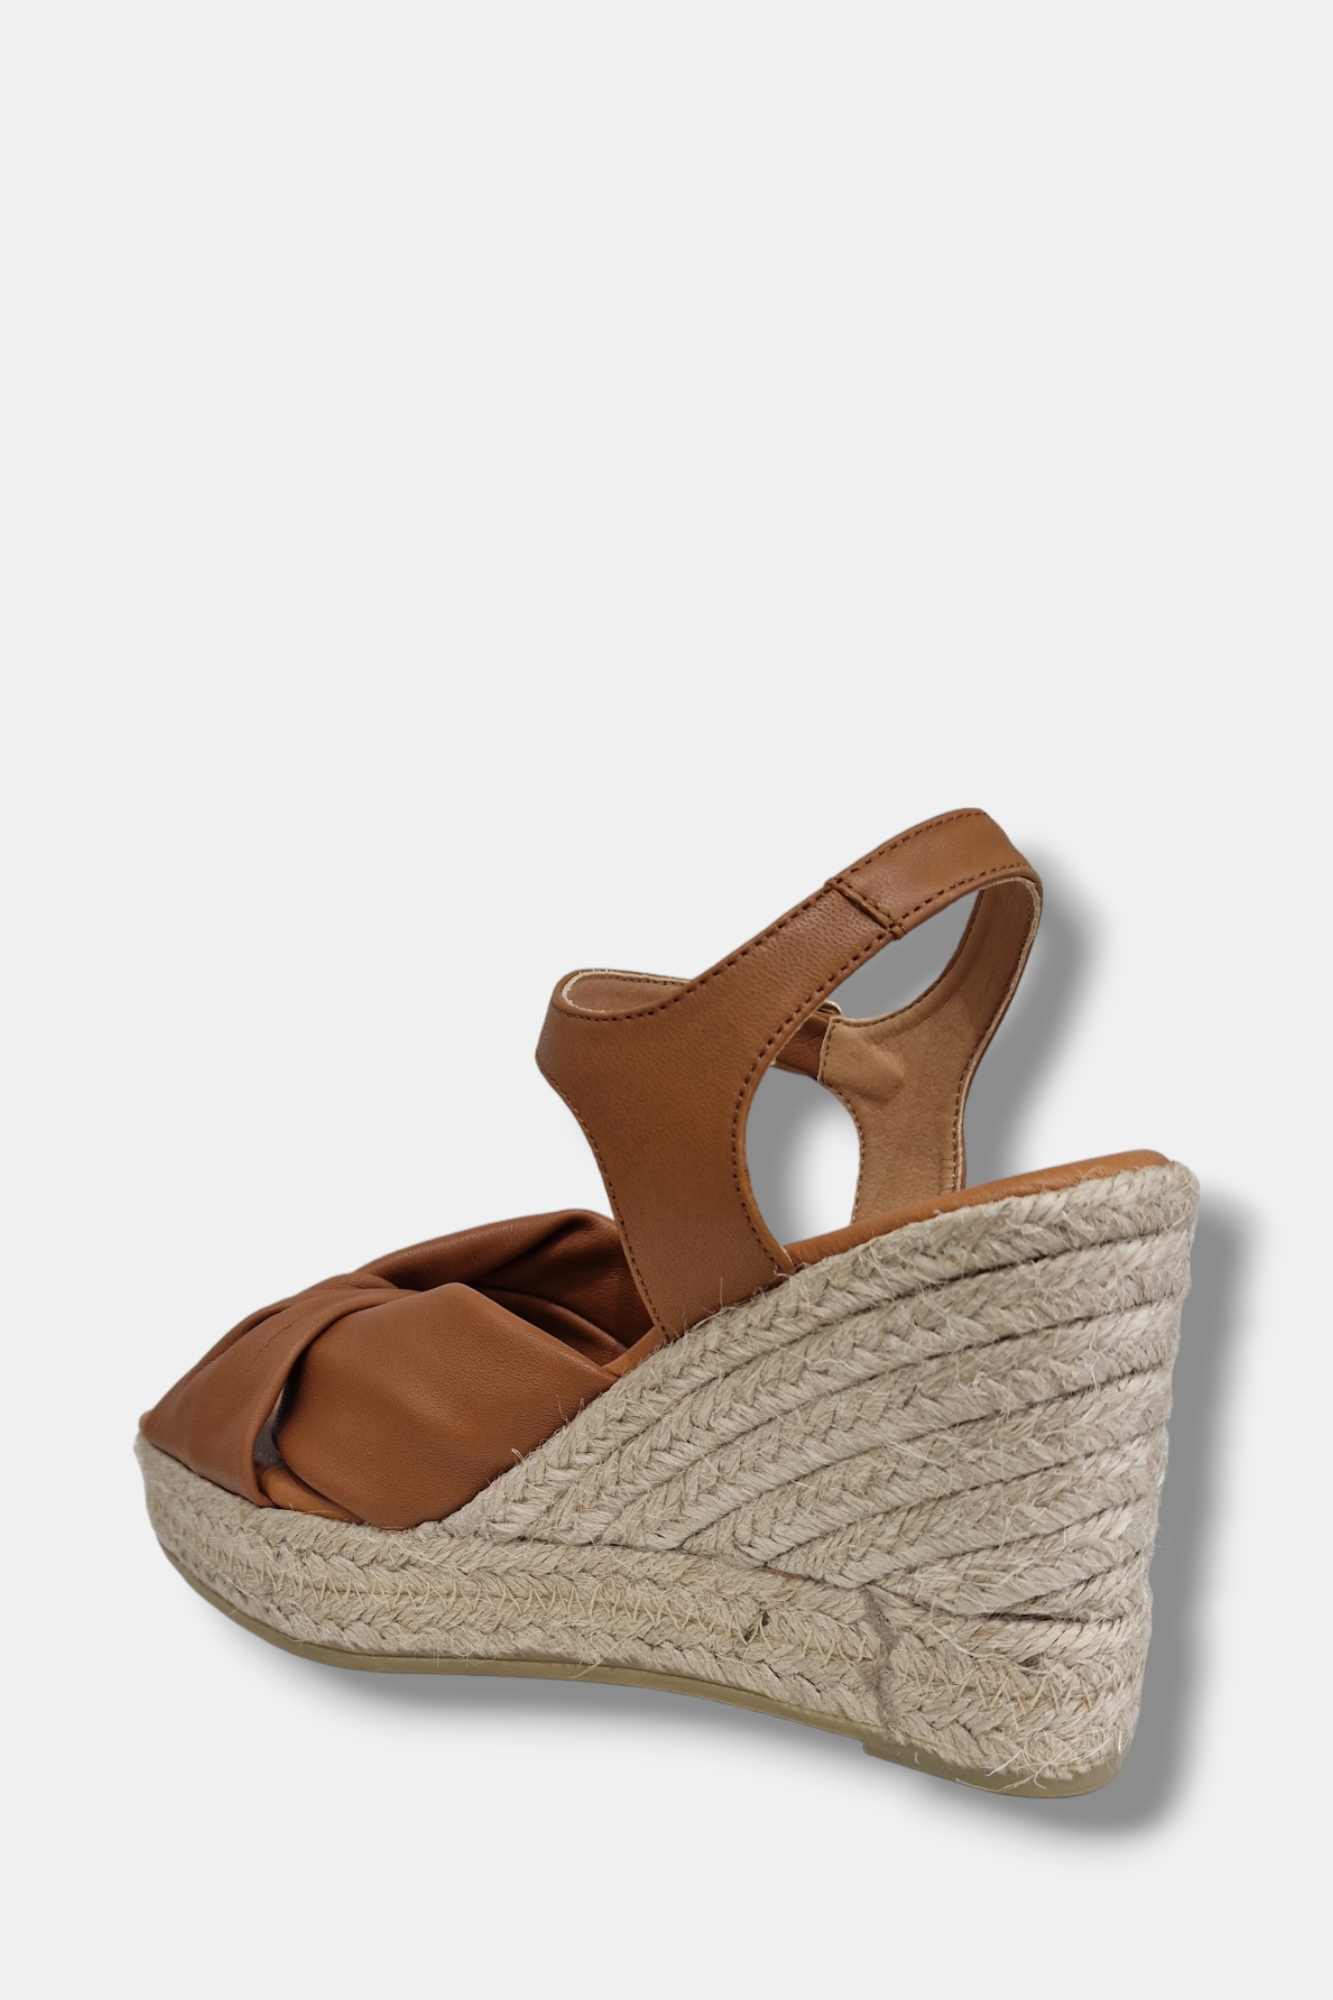 MARIAN TAN LEATHER ESPADRILLE WEDGES